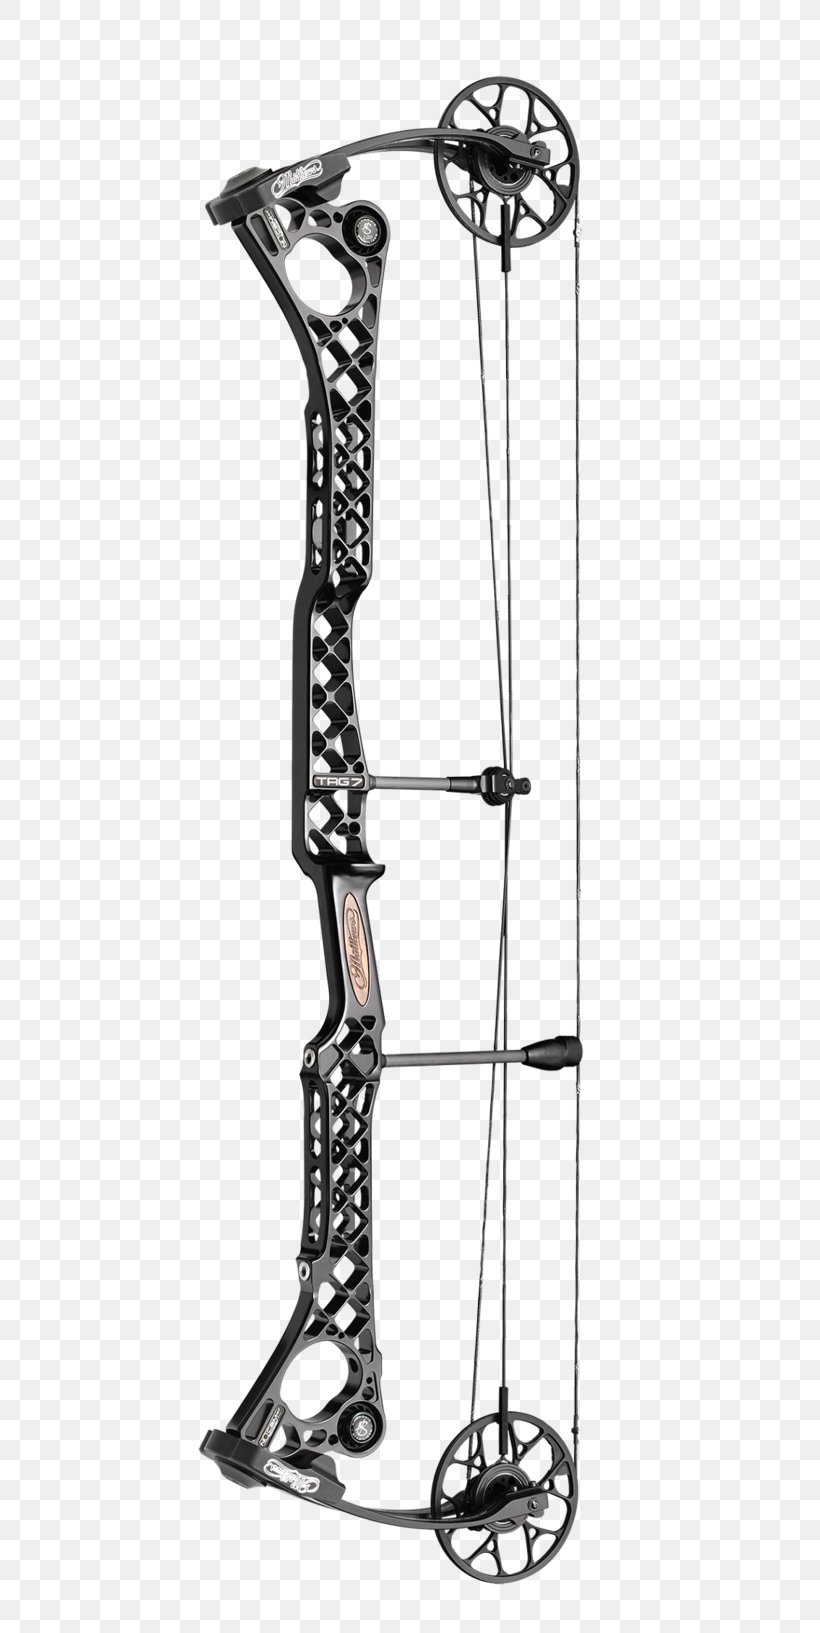 Bow And Arrow Compound Bows Bowhunting Archery, PNG, 740x1633px, Bow And Arrow, Archery, Bicycle Fork, Bow, Bowhunting Download Free